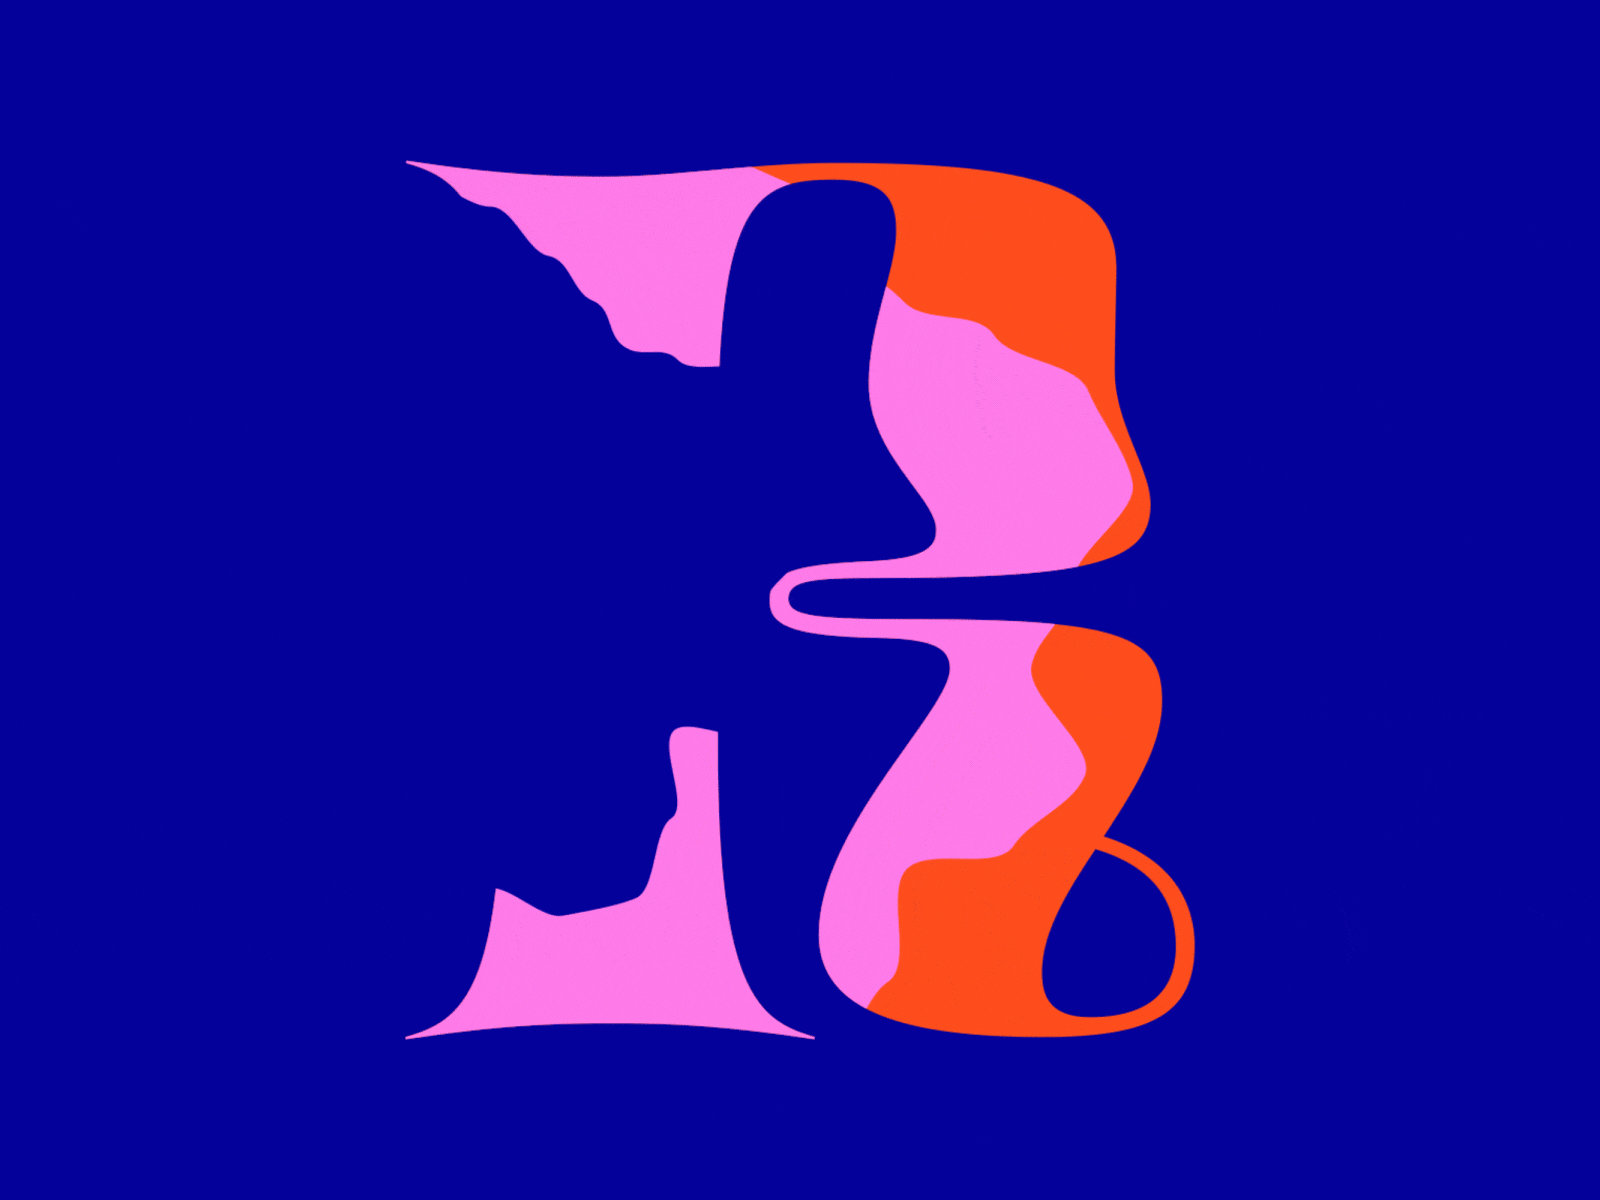 36 Days of Type / R 36 days of type 36daysoftype 36daysoftype08 36dot ae after effects animated animated type animation animography colors design kinetic kinetic type motion motion design motion graphic motion graphics type typography